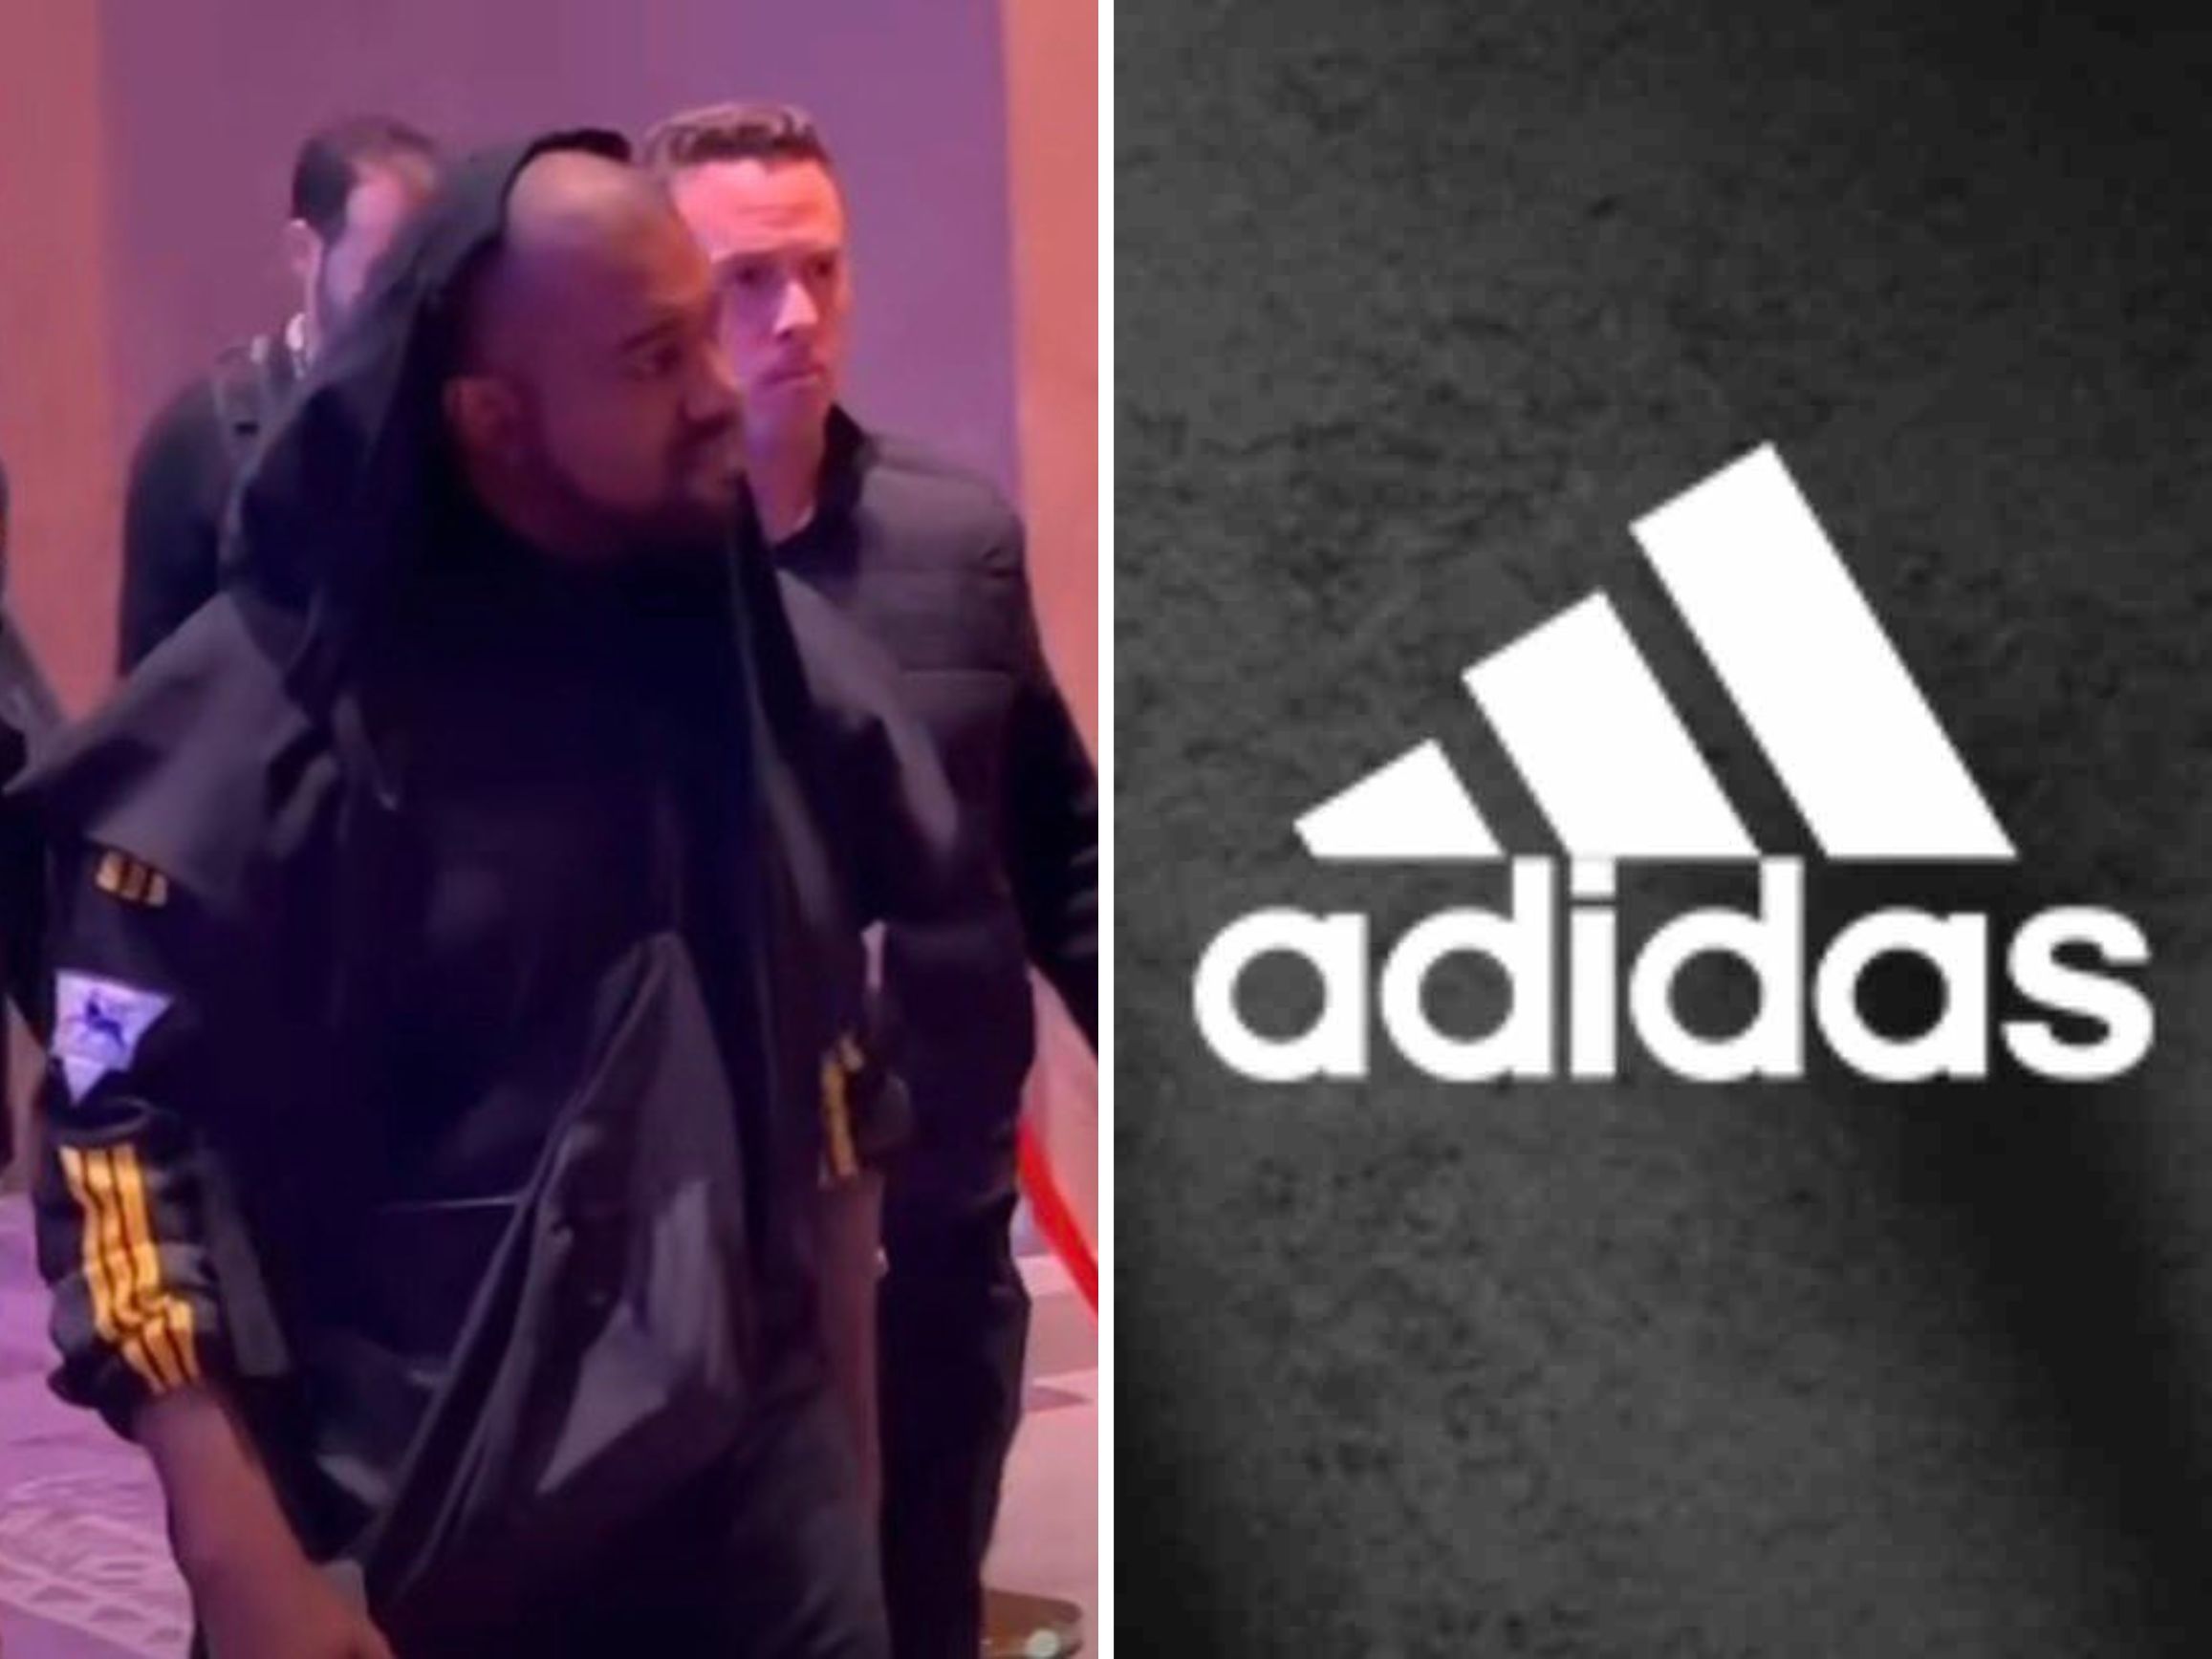 Which Barclays Era Adidas Kit Did Kanye West Wore to Tyson Fury Fight?